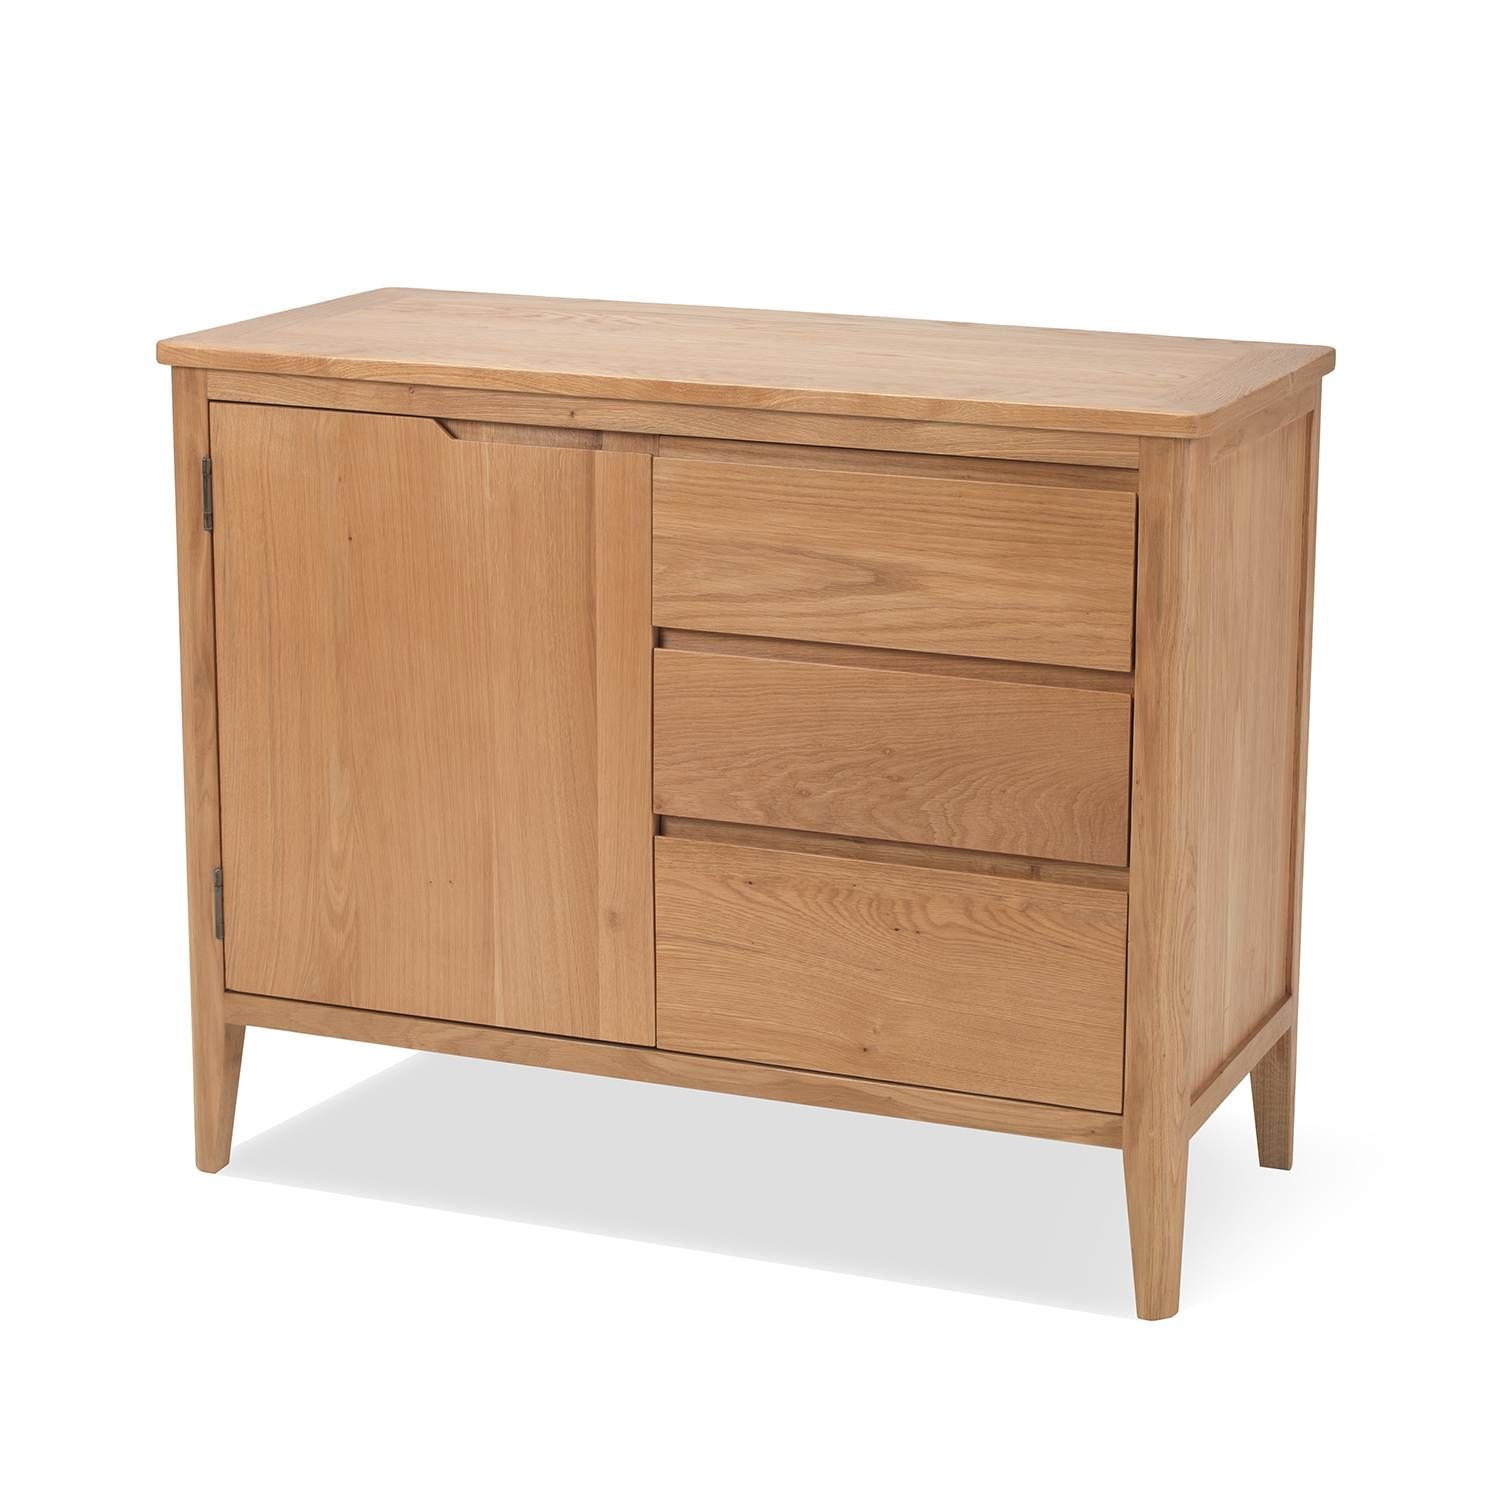 Cadley Oak Small Sideboard With Drawers – Lifestyle Furniture Uk Throughout Oak Sideboard Uk (View 10 of 20)